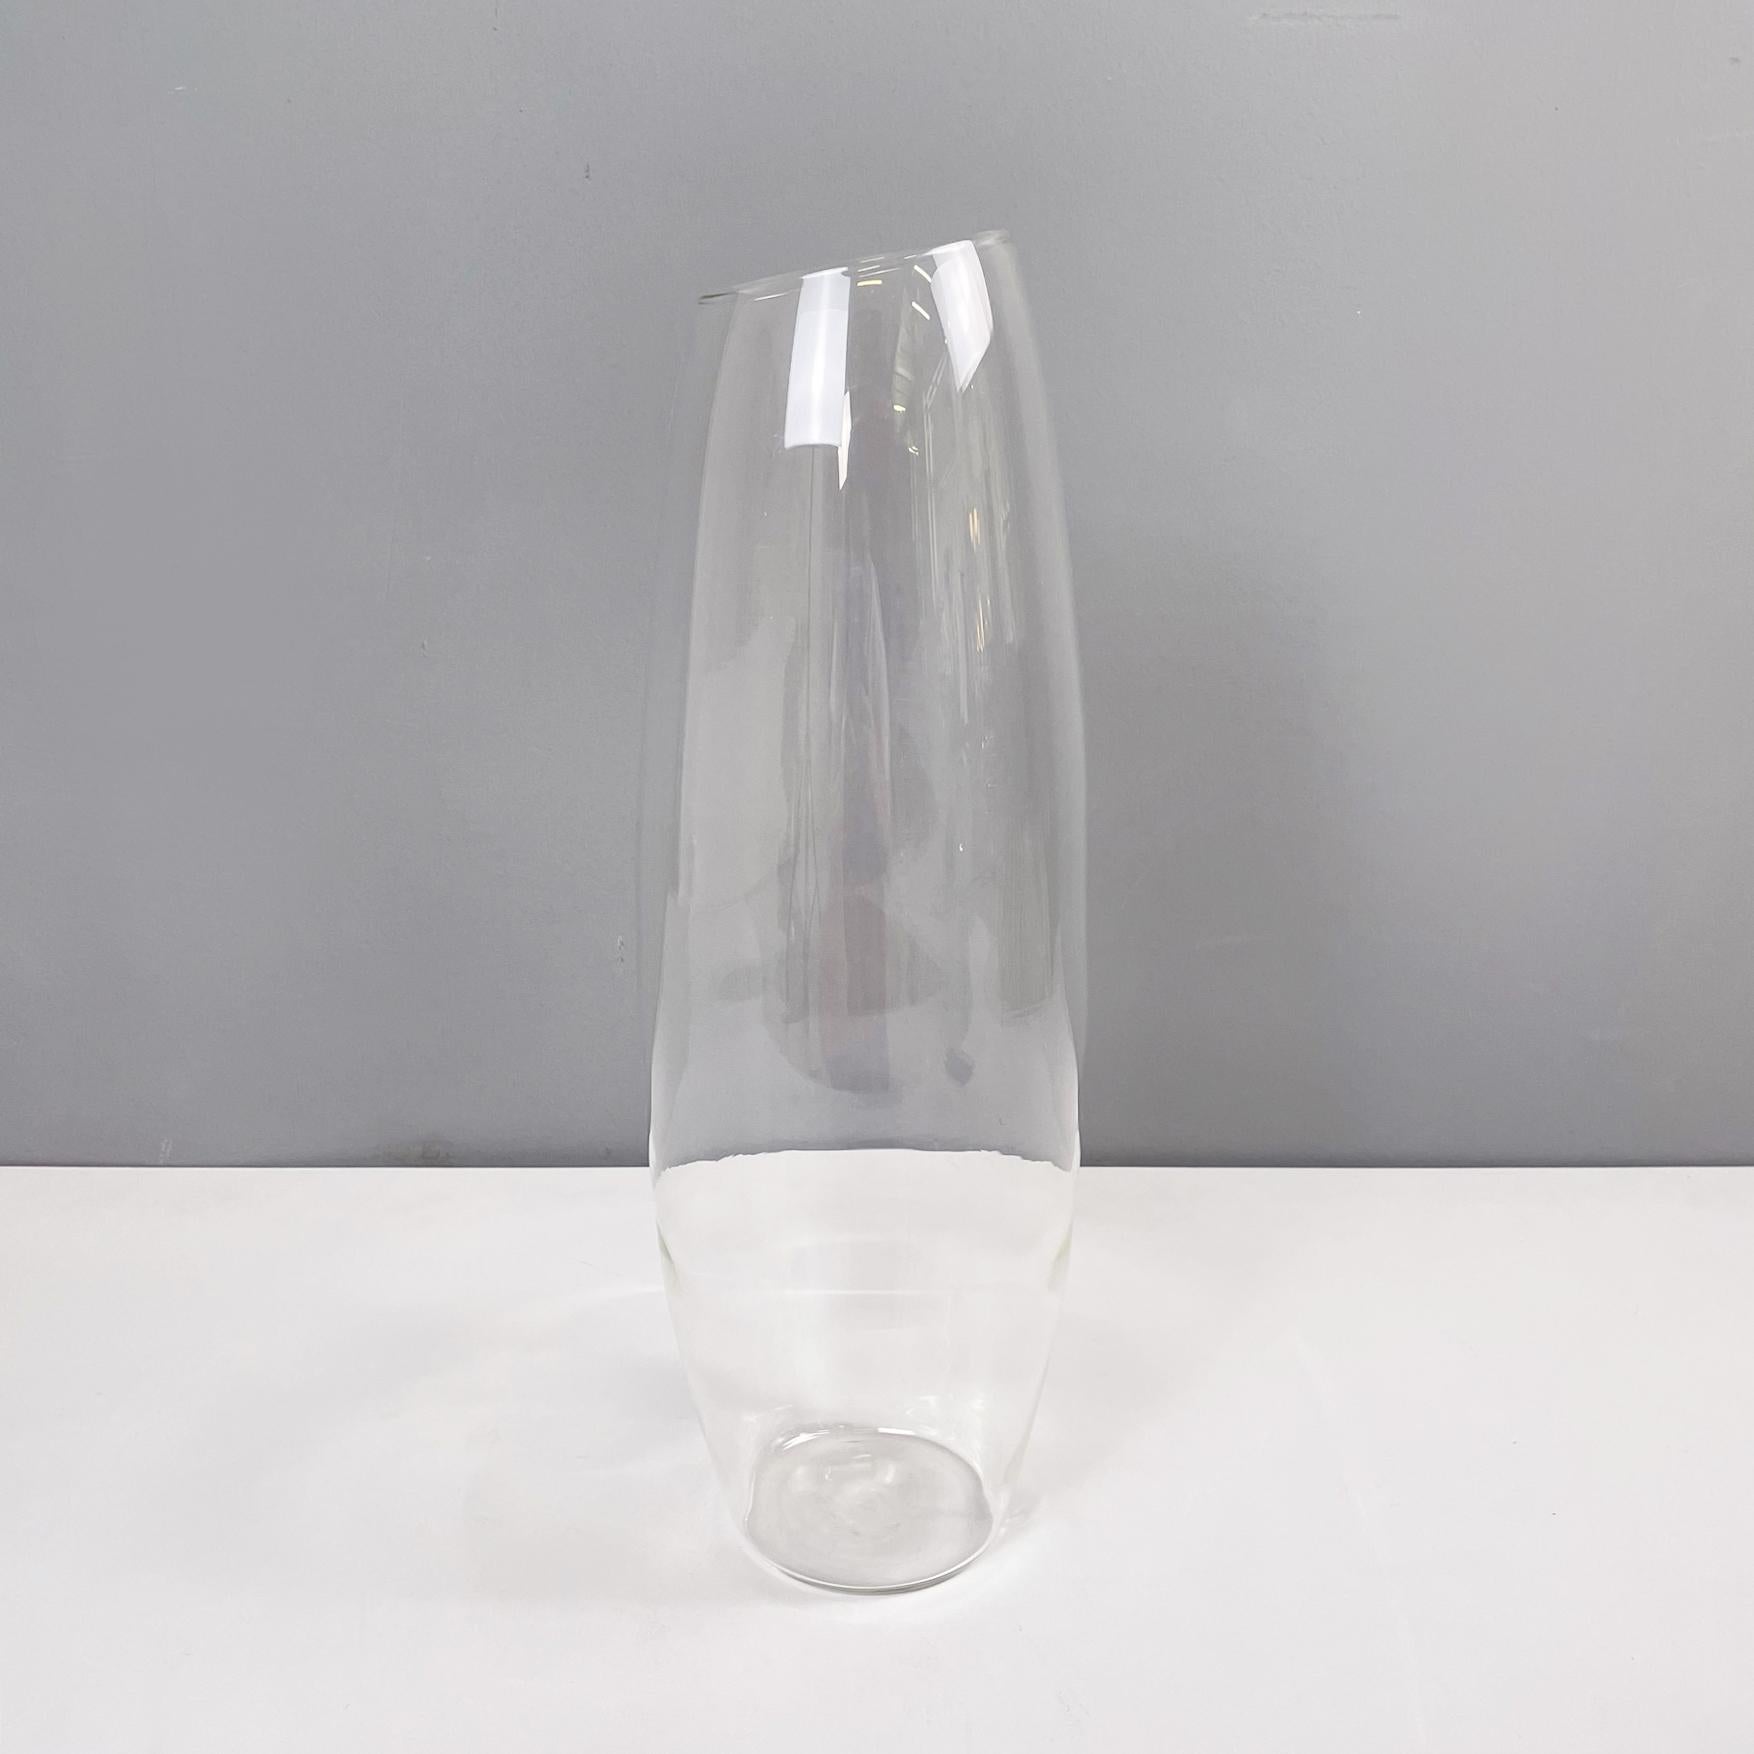 Italian modern Glass vase with round shape by Roberto Faccioli, 1990s
Round base vase in finely handcrafted glass. The structure has a rounded part in the center. Diagonal top hole.
Designed and produced by Roberto Faccioli in 1990s.
Very good